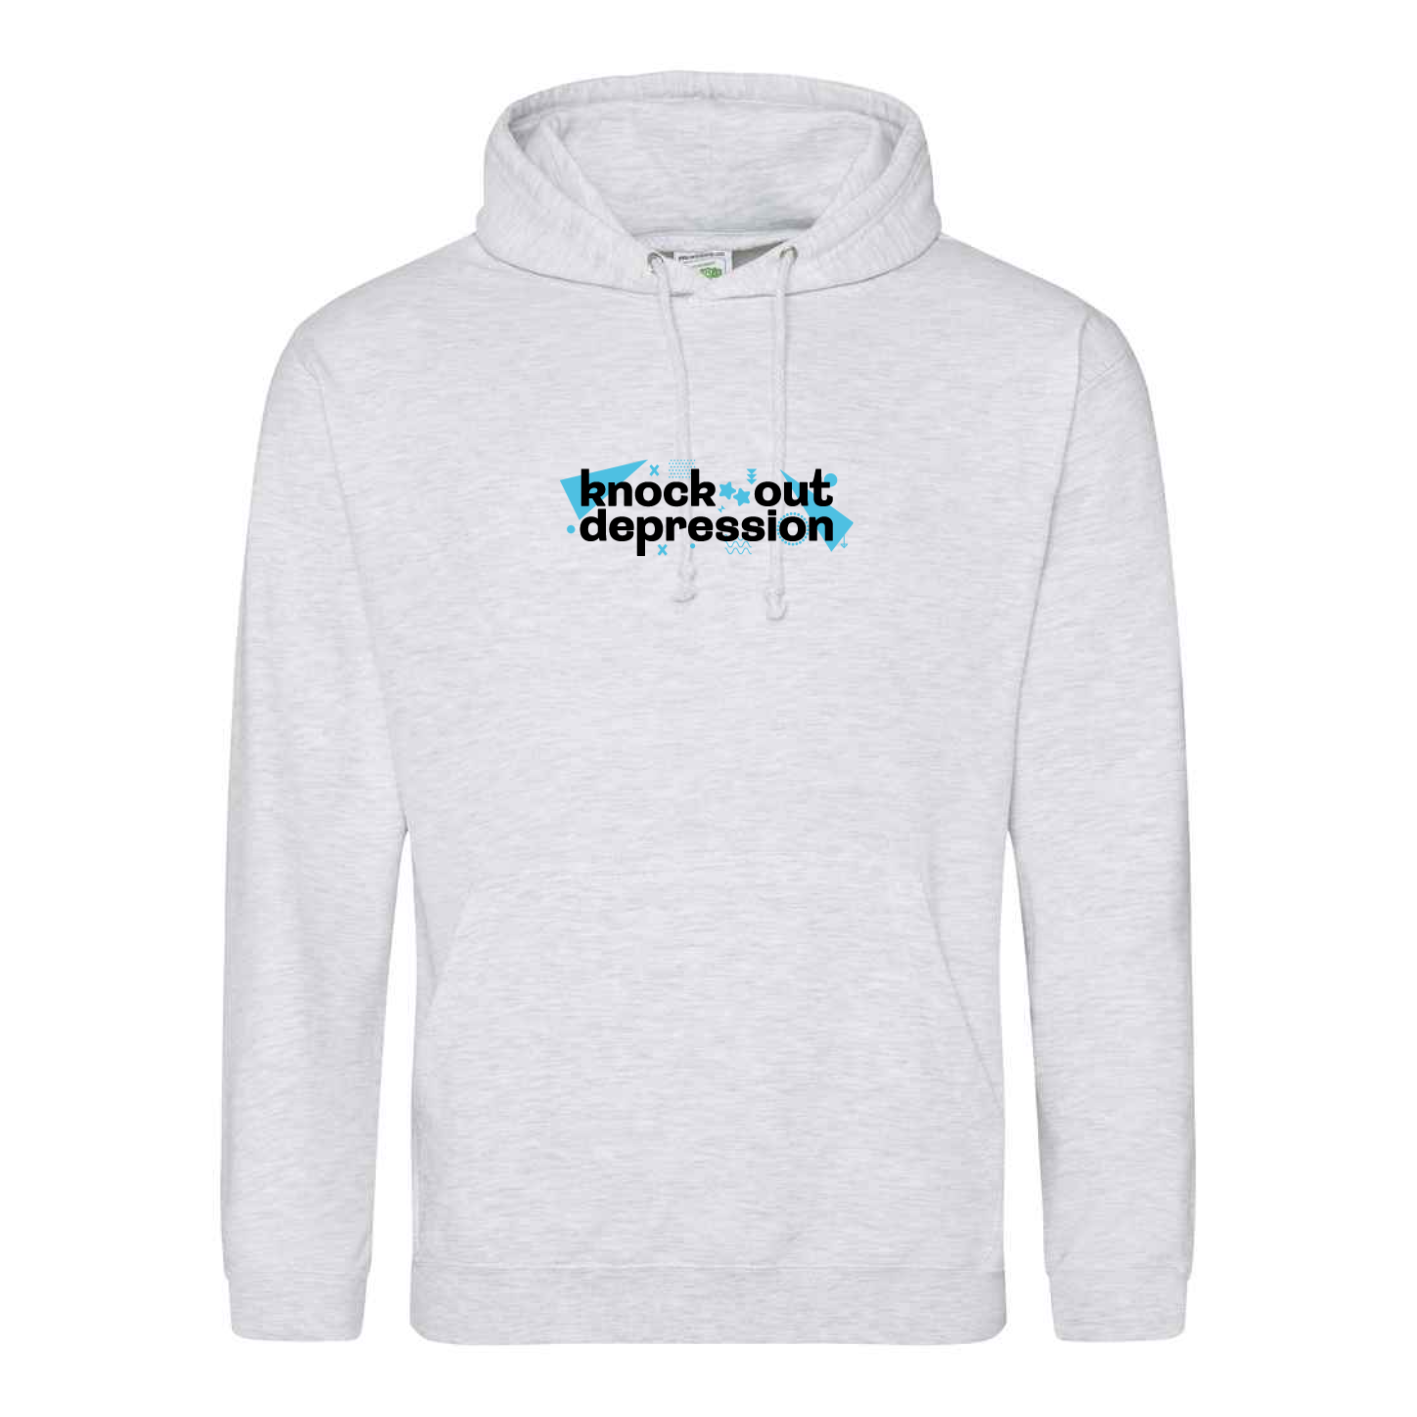 Knock Out depression hoodie in ash grey